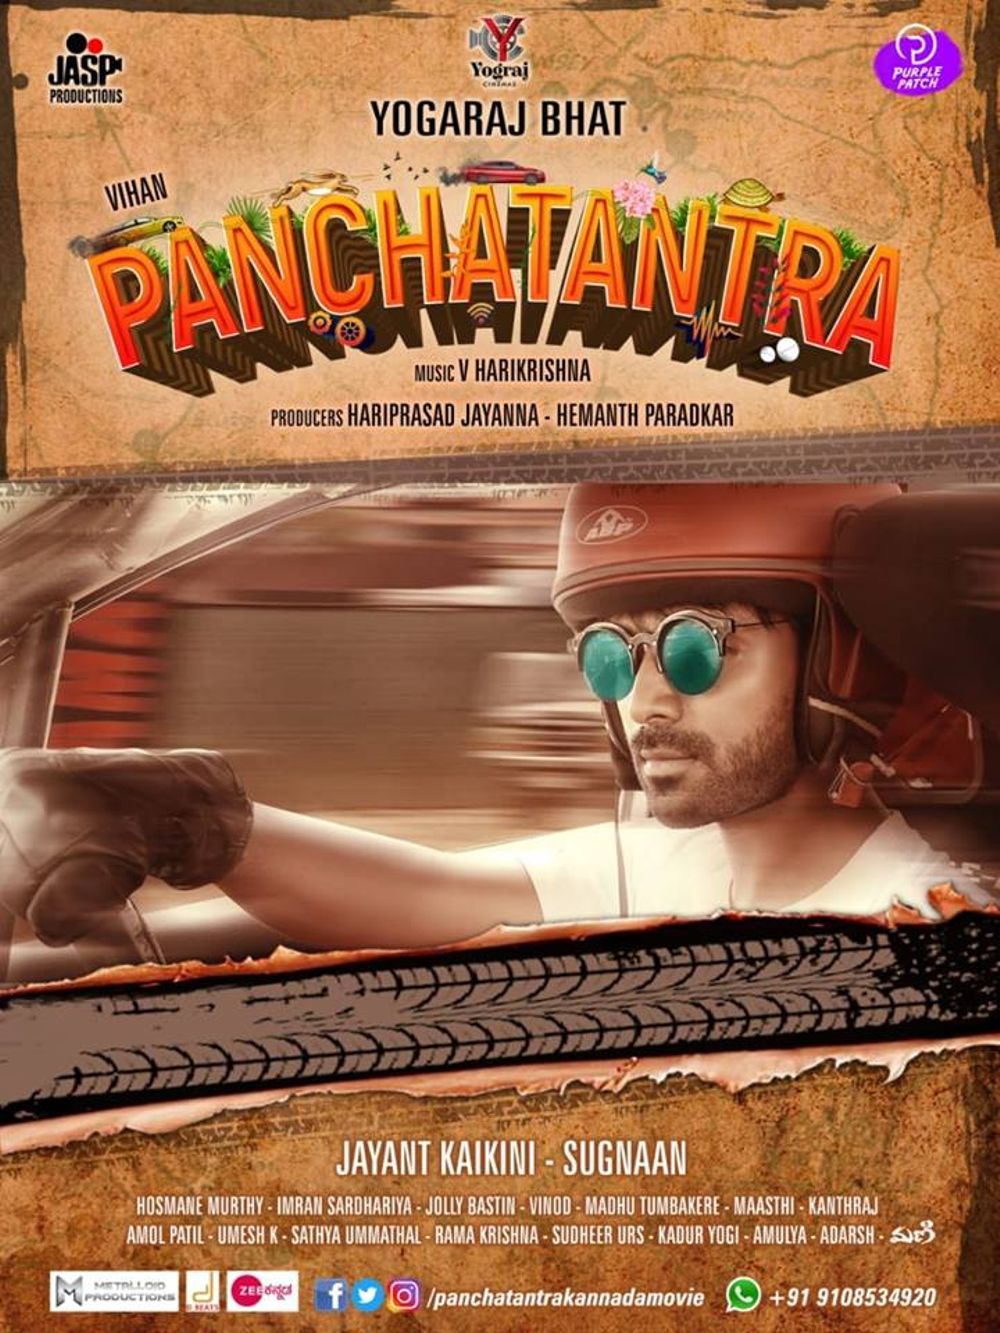 Panchatantra Movie Review